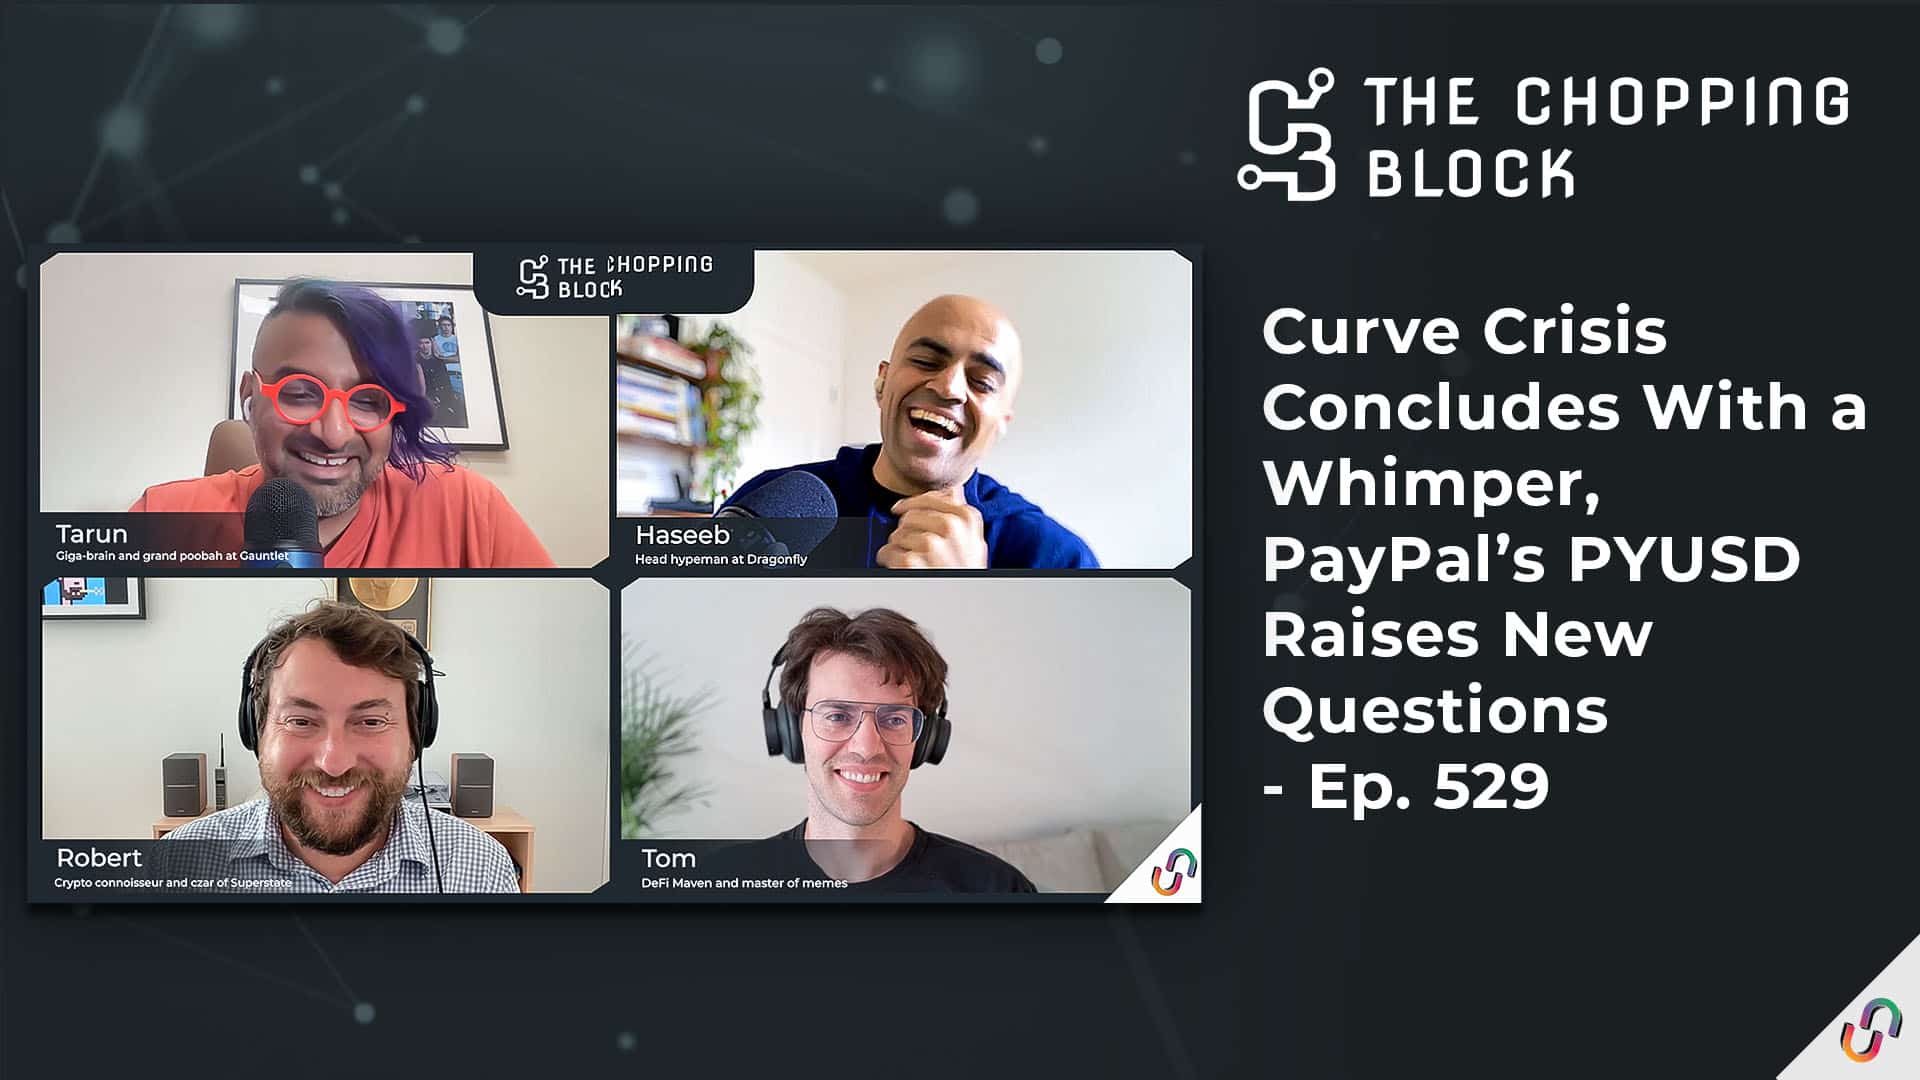 The Chopping Block: Curve Crisis Concludes With a Whimper, PayPal’s PYUSD Raises New Questions - Ep. 529